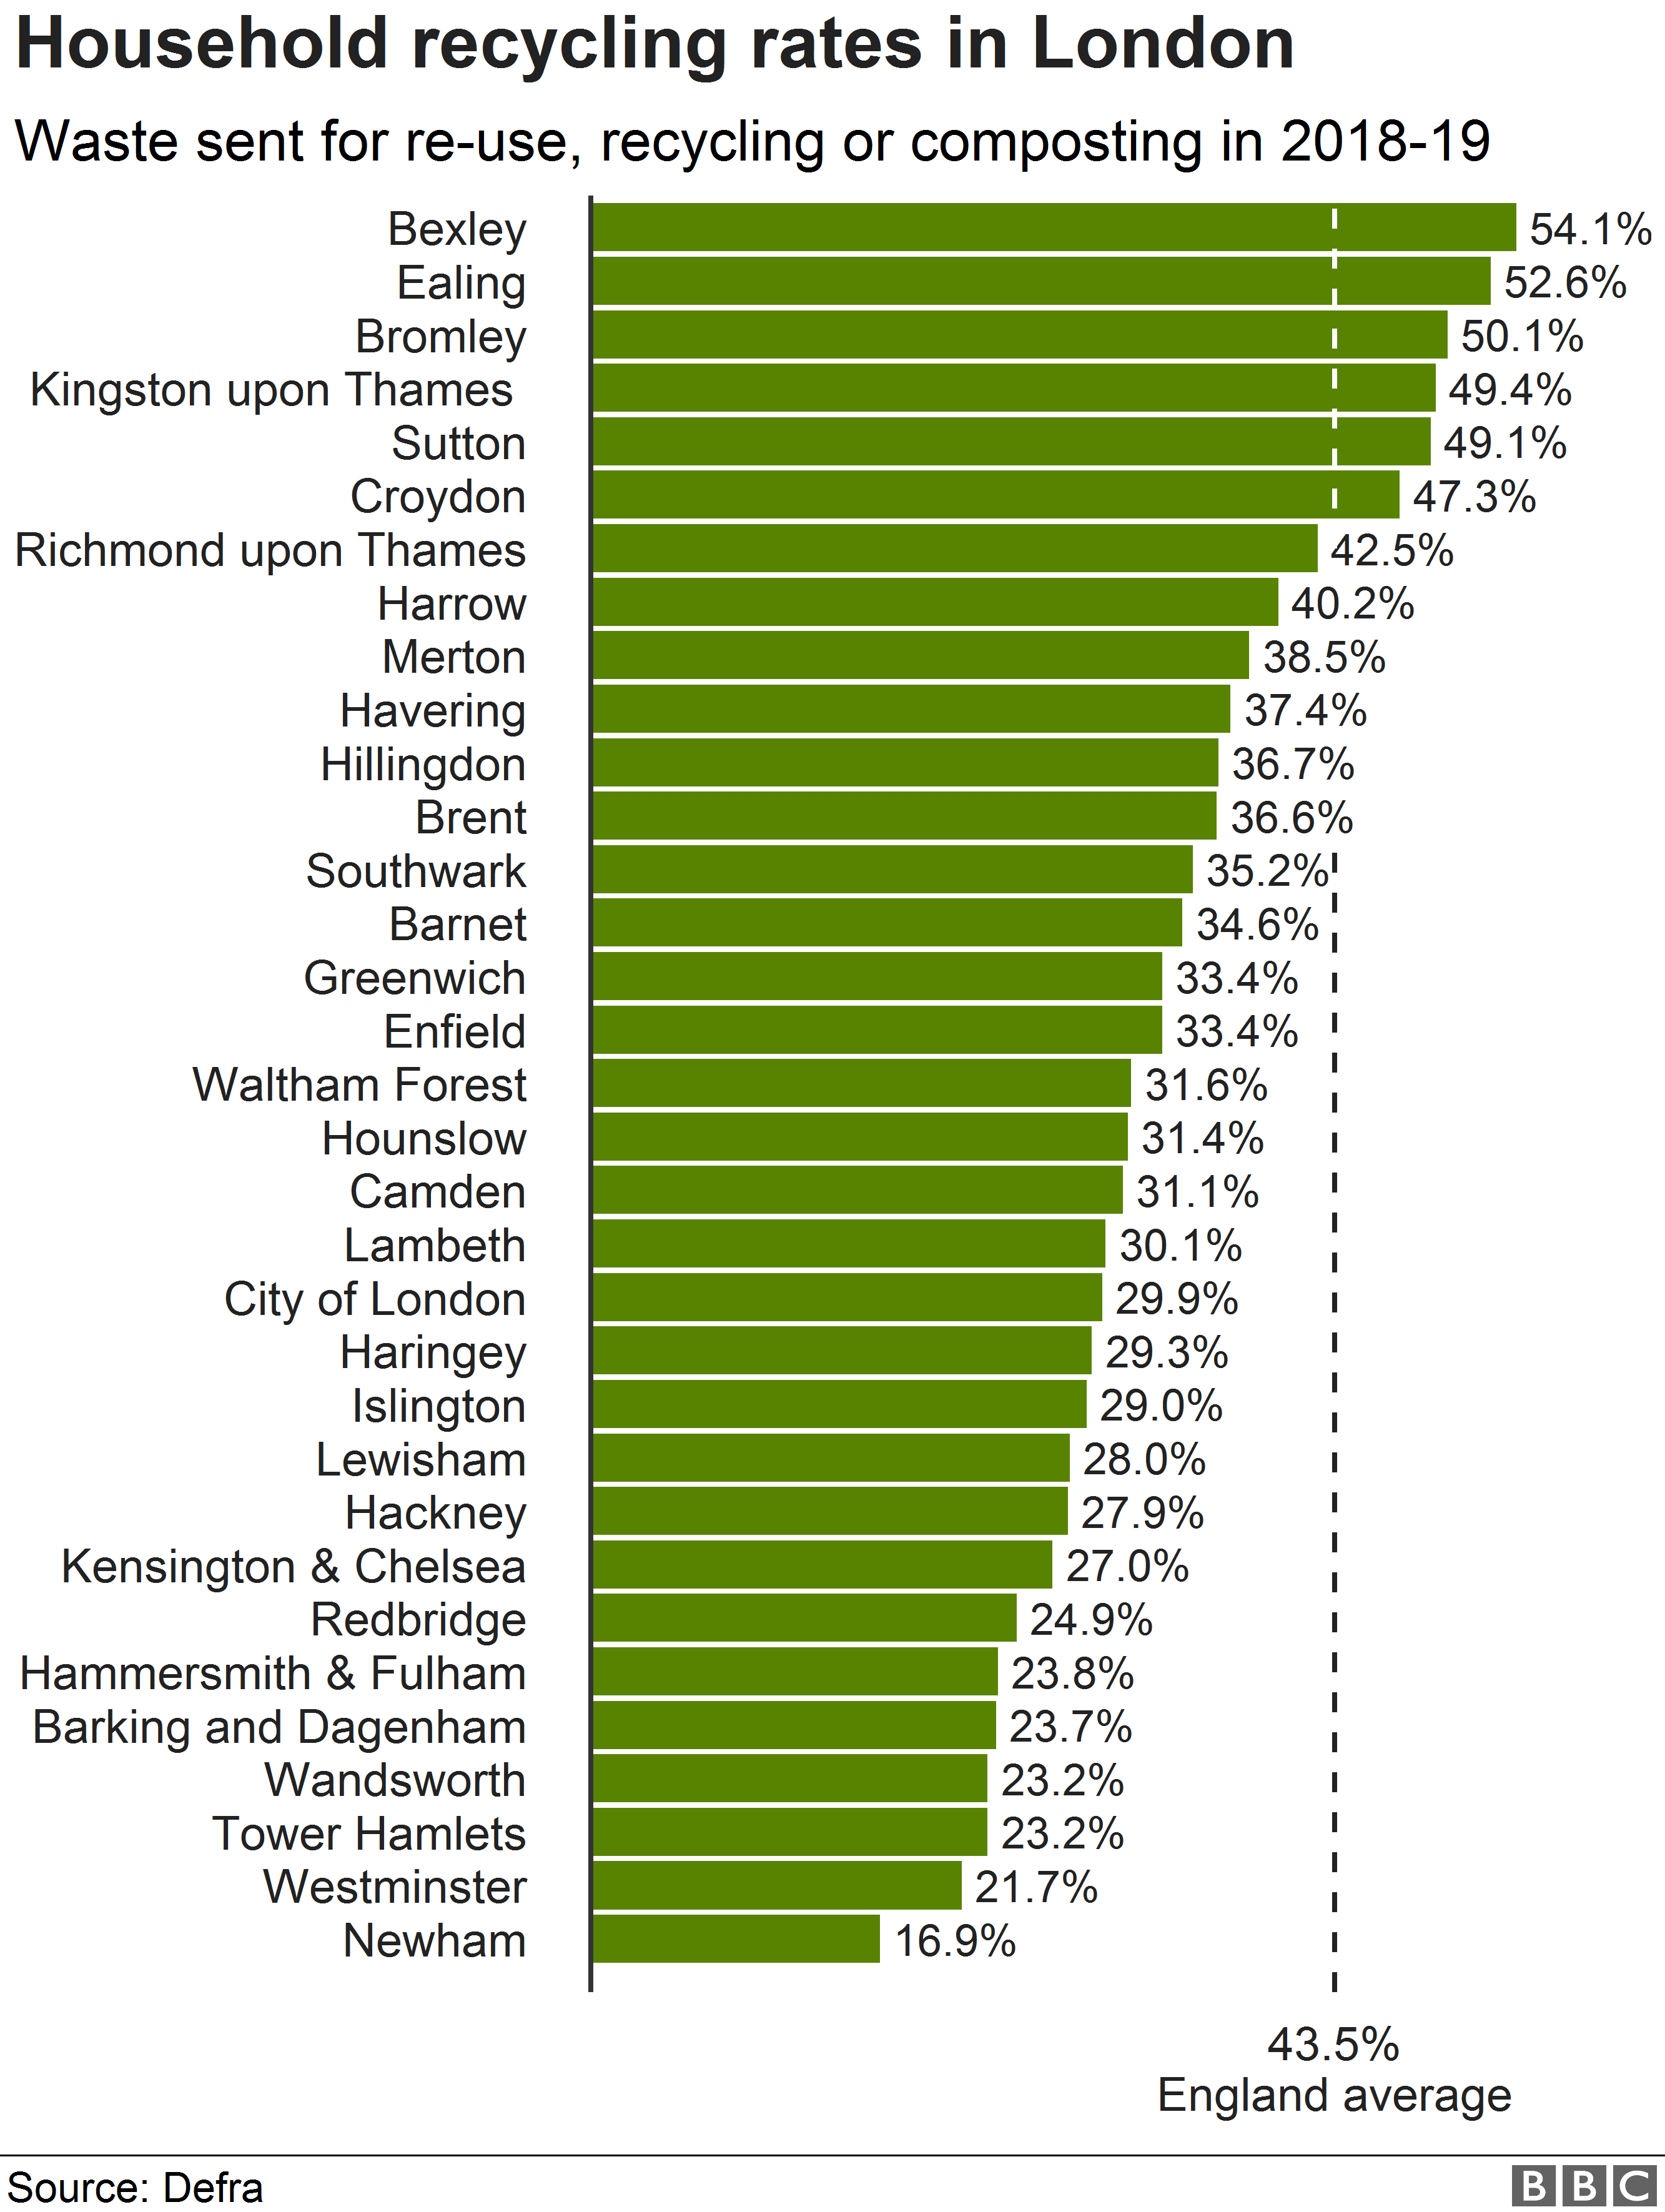 Chart showing household recycling rates in London boroughs